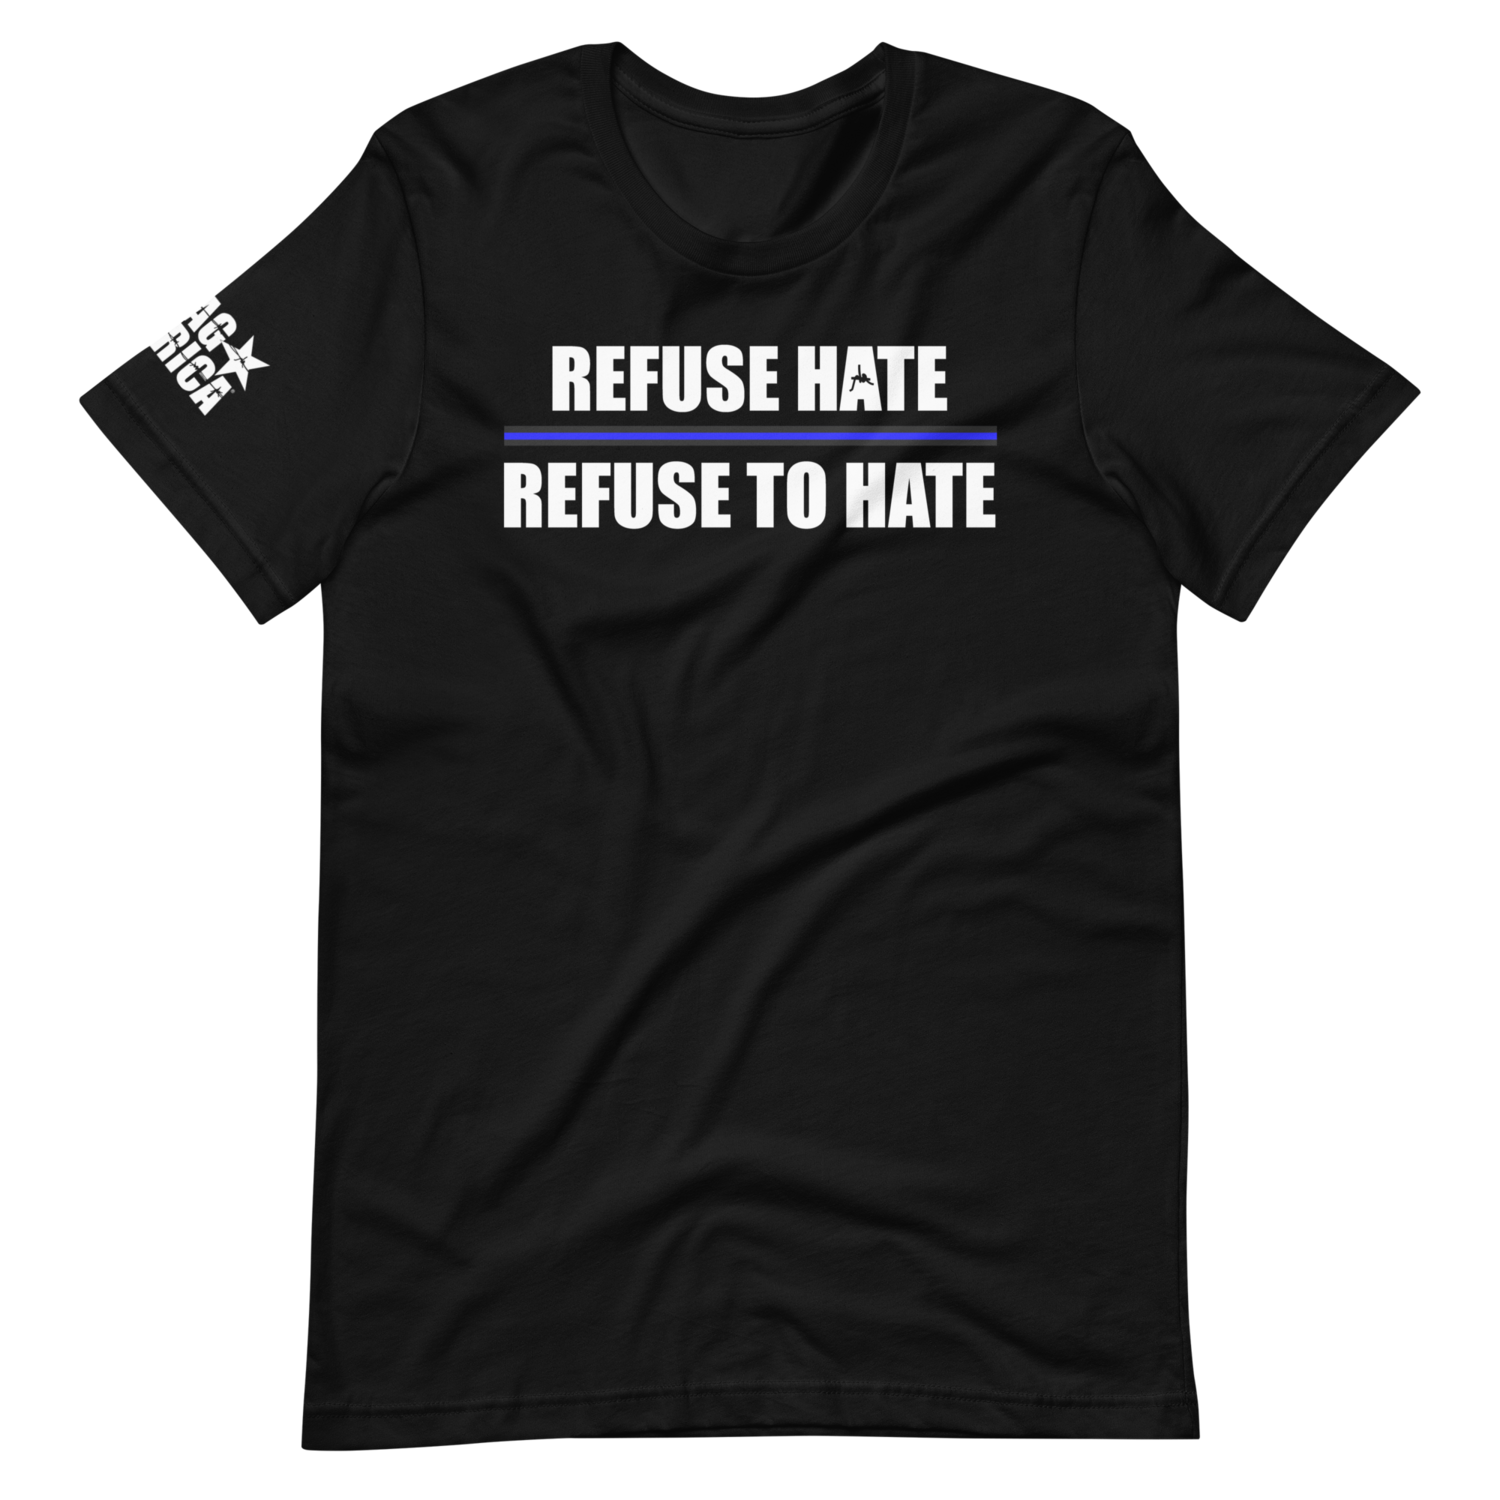 Refuse Hate - Thin Blue Line